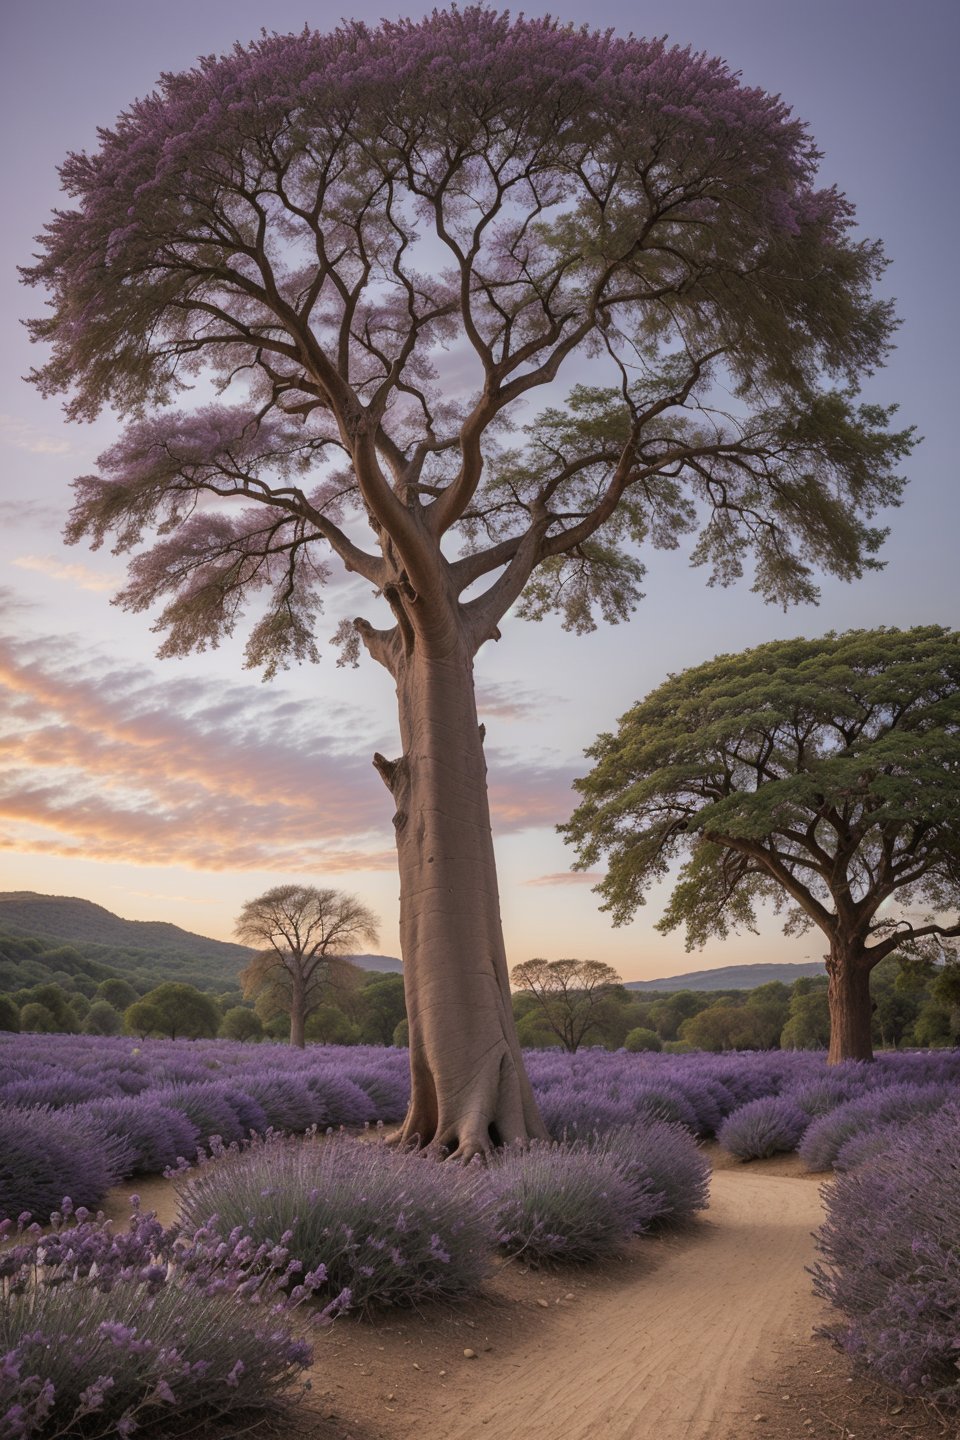 landscape art stylized by Michael James Smith, Irresistible Lavender, Lilac and Periwinkle Baobab, Fine art, Fearful, Mono Color, photography